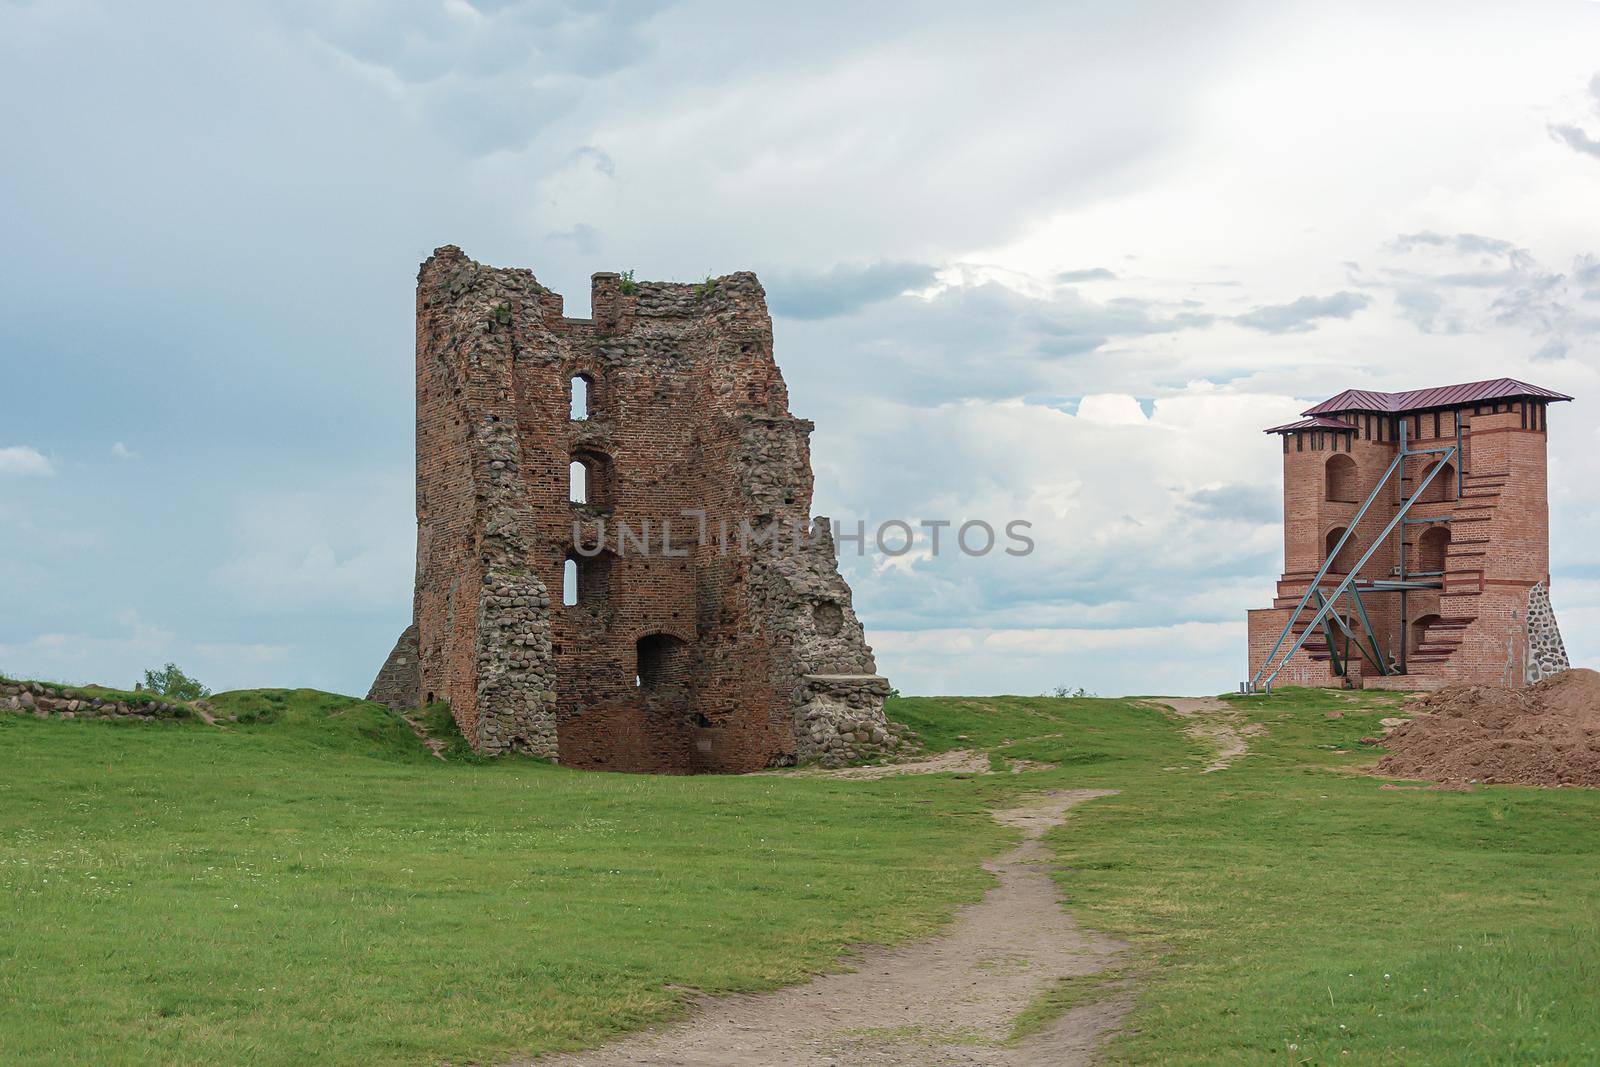 Remains of the ruins of an old fortress (Novogrudok, Belarus). Stock photography.